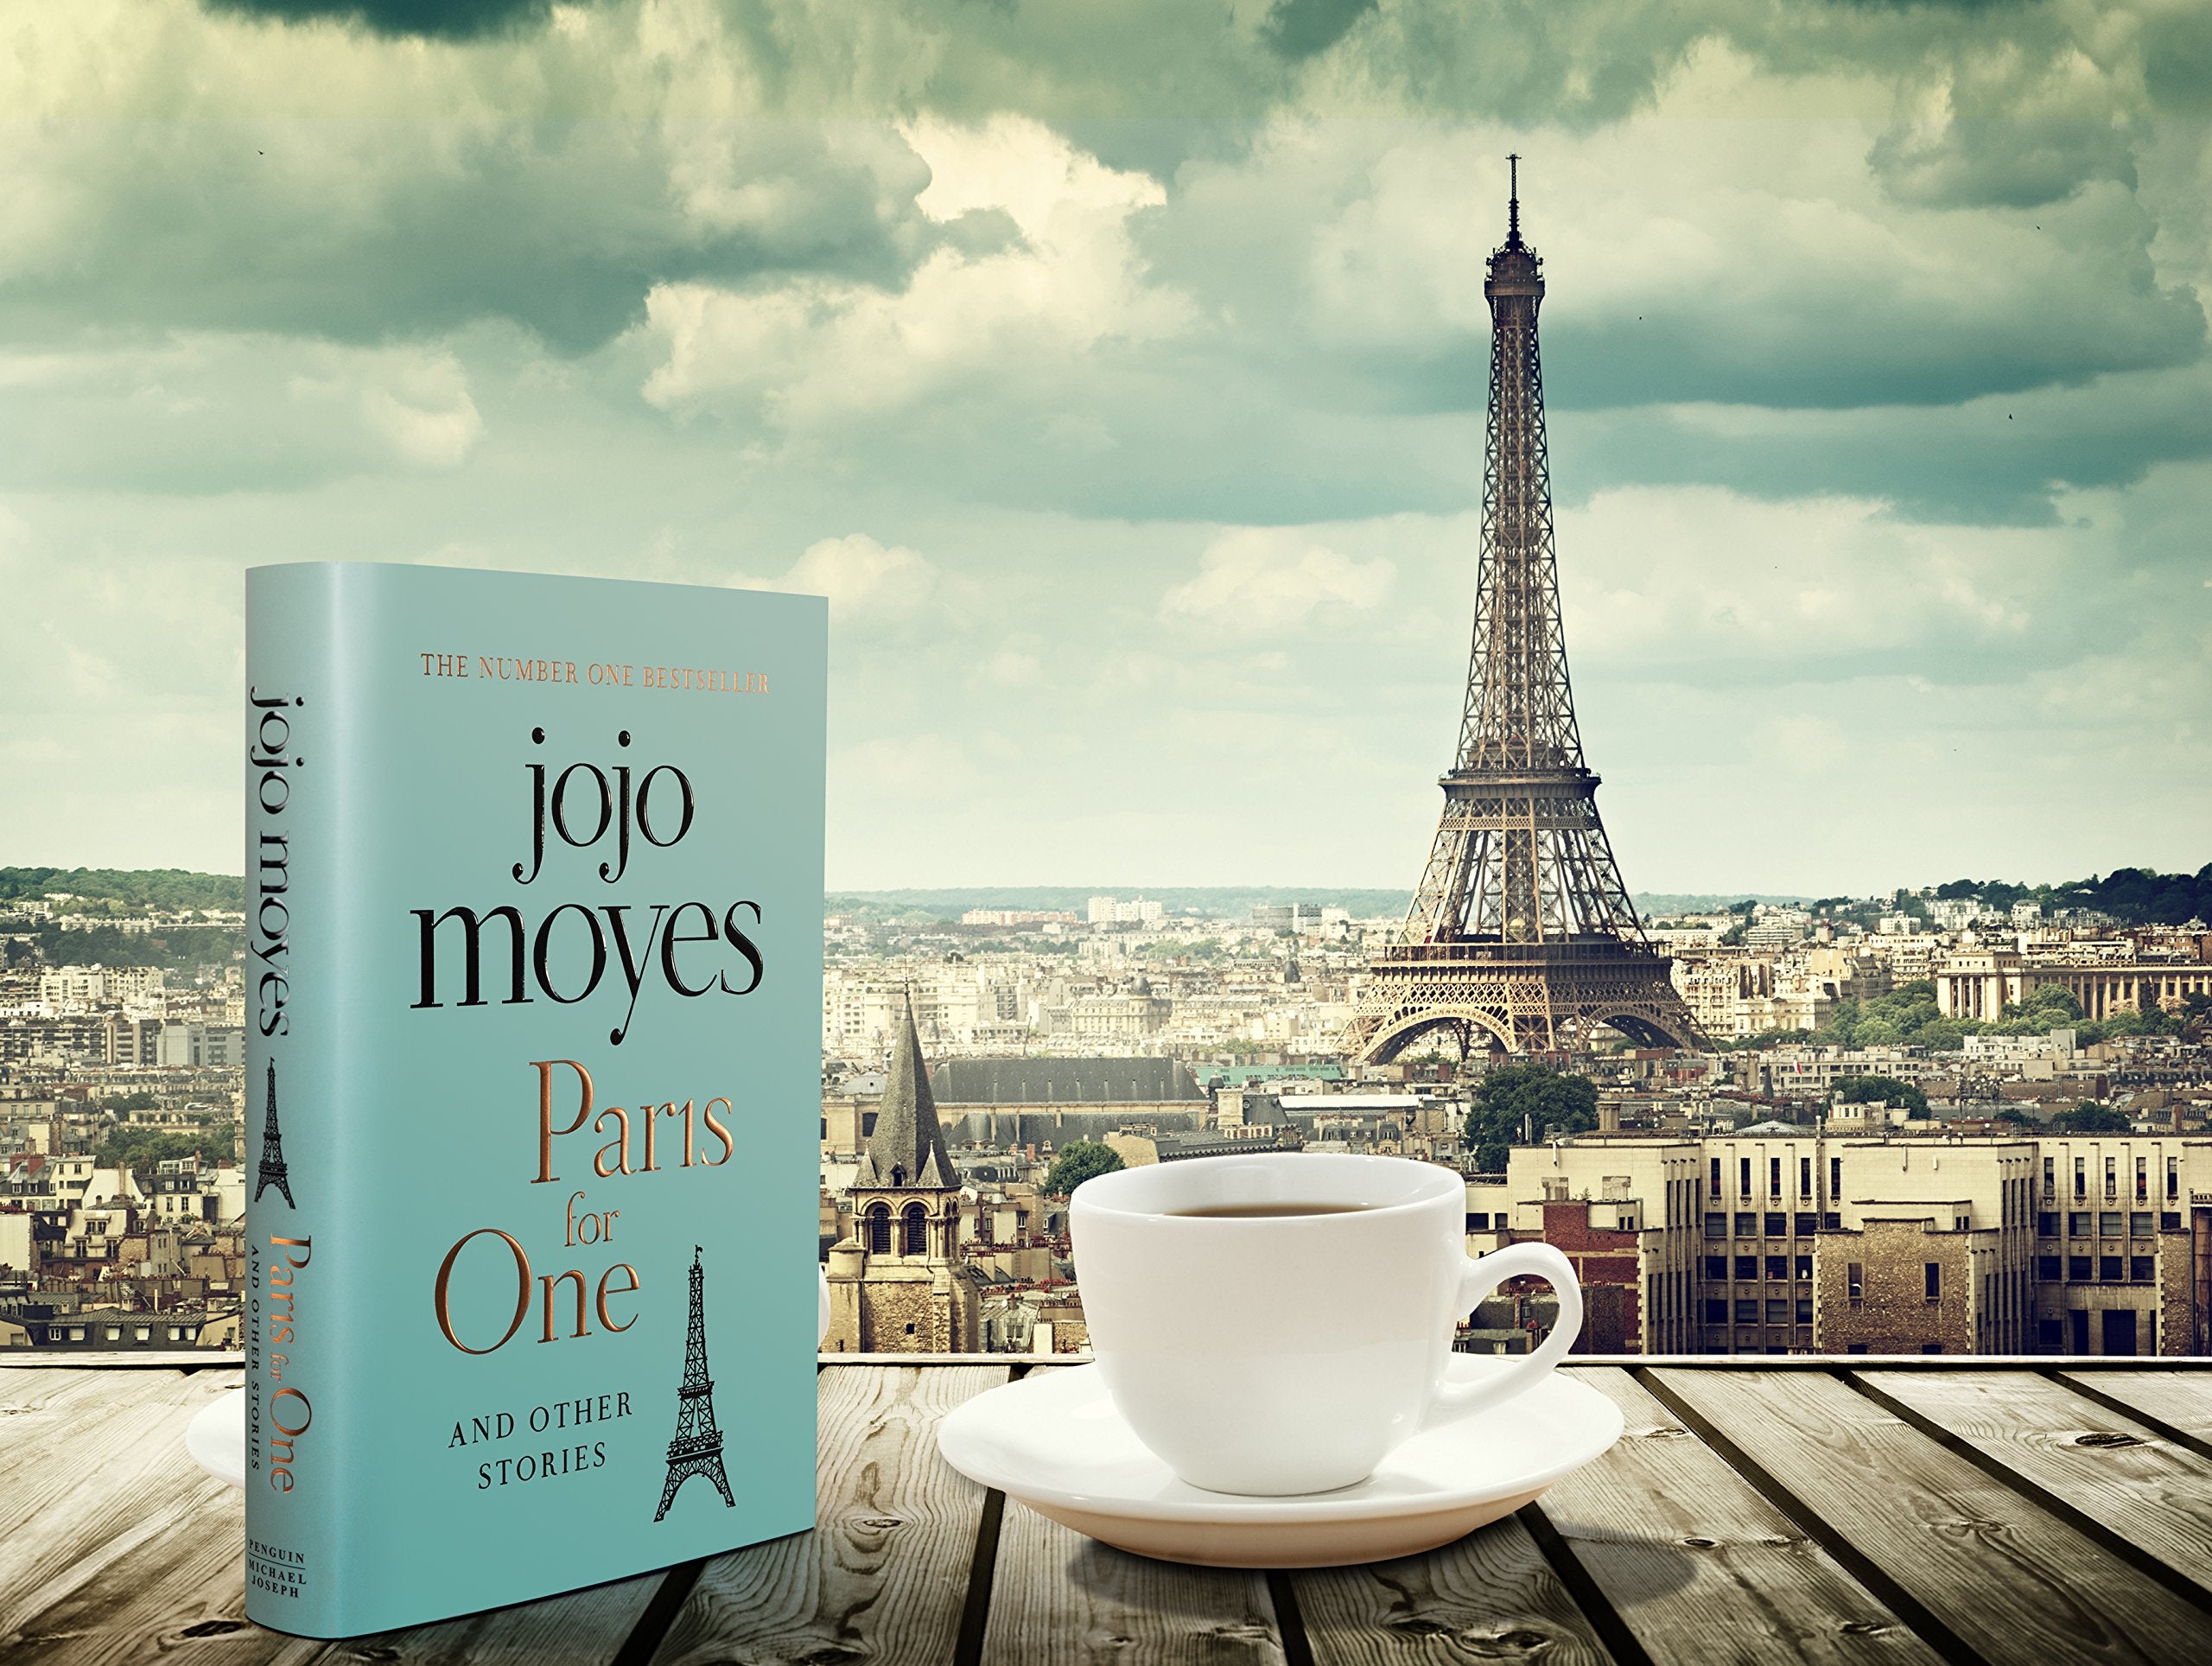 Paris for One and Other Stories - The English Bookshop Kuwait